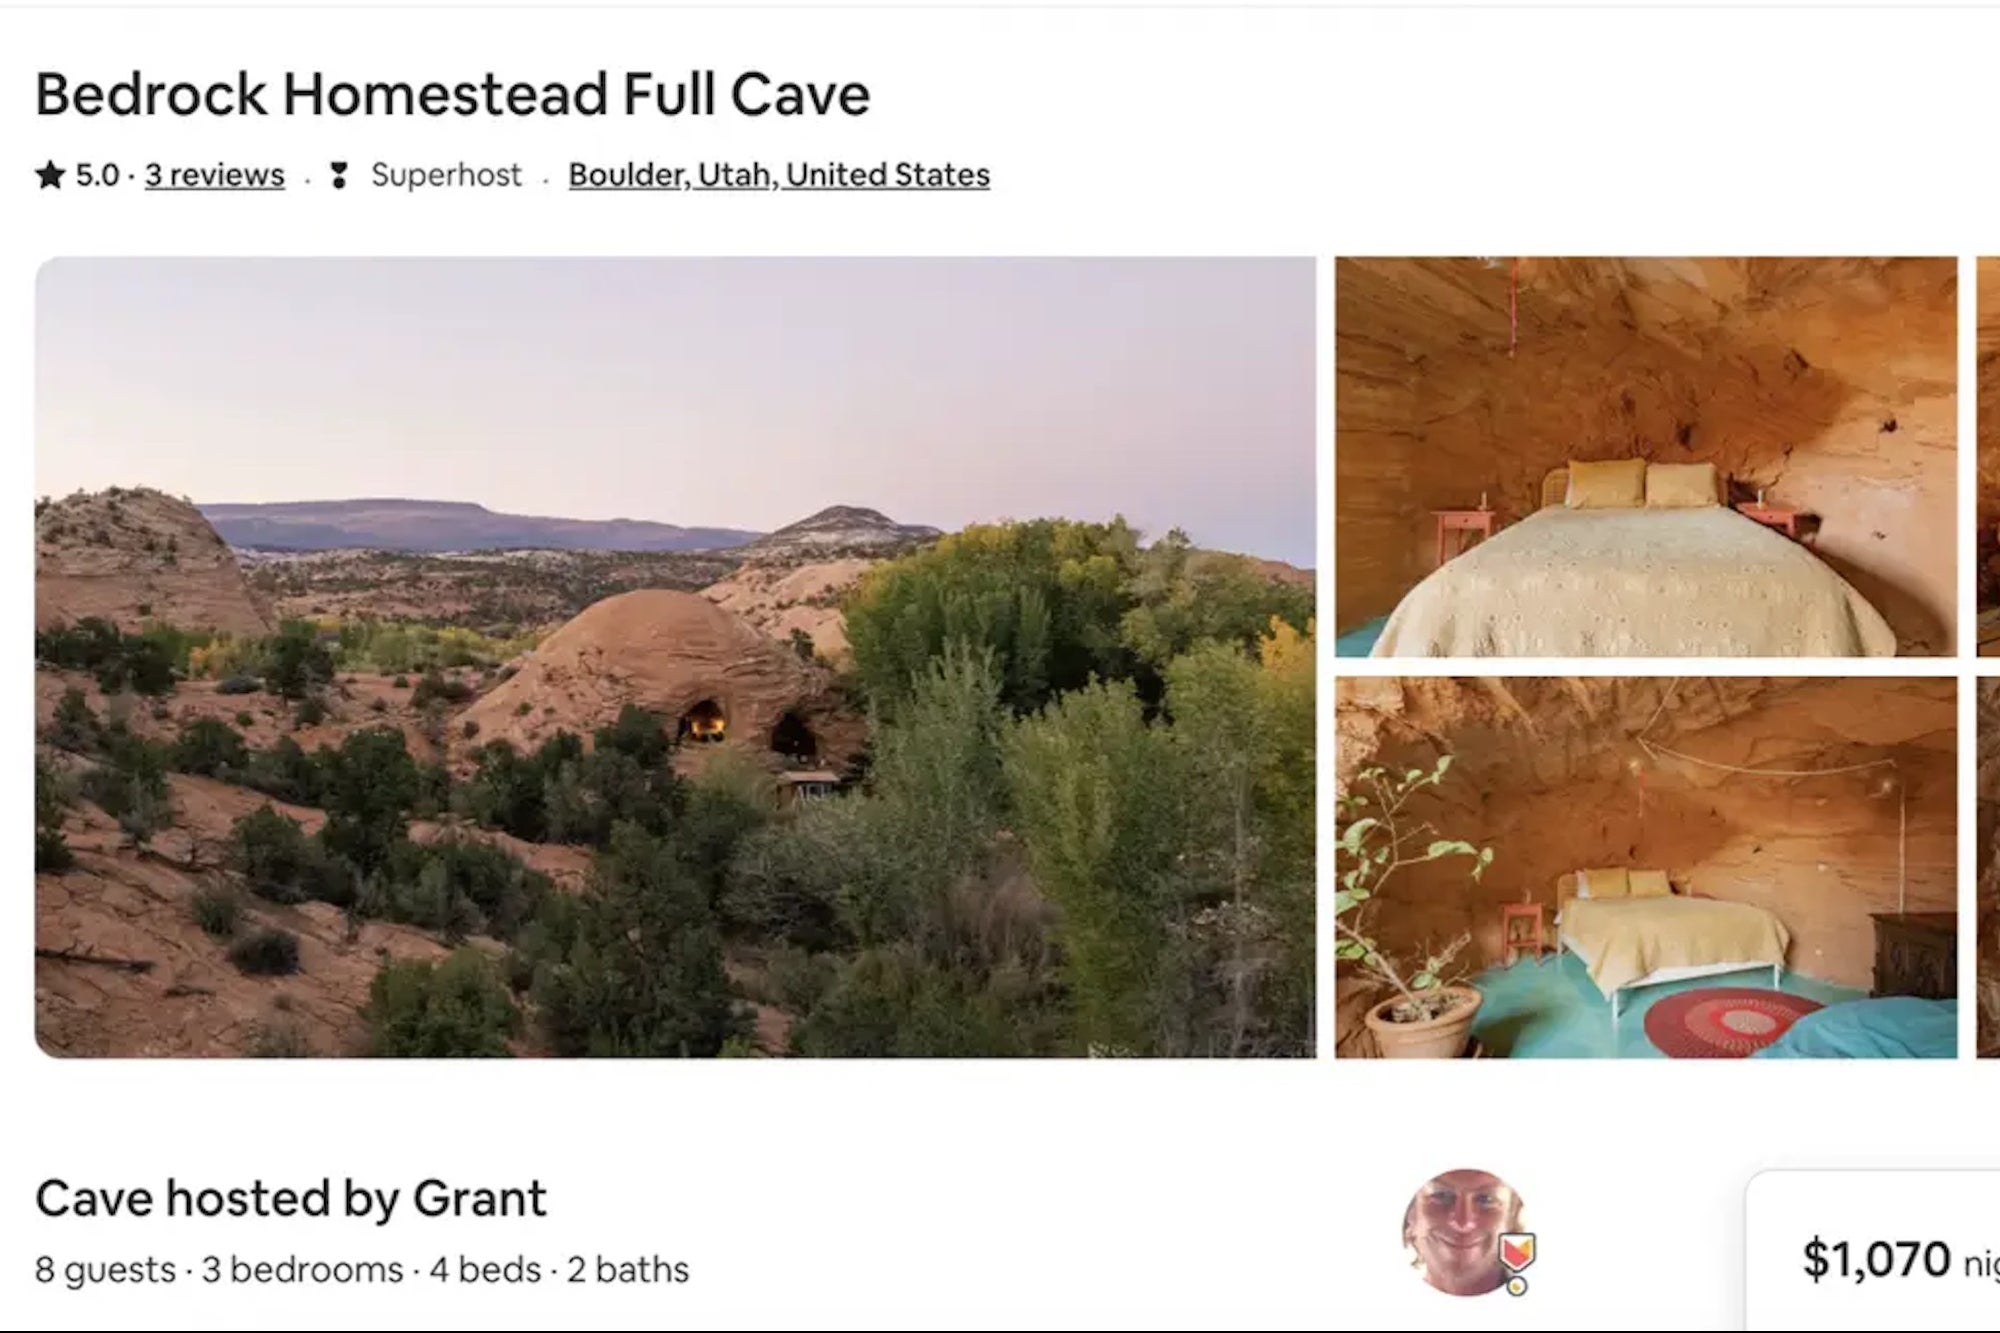 Utah Cave Home Renting for $1,000 a Night on Airbnb: Photos